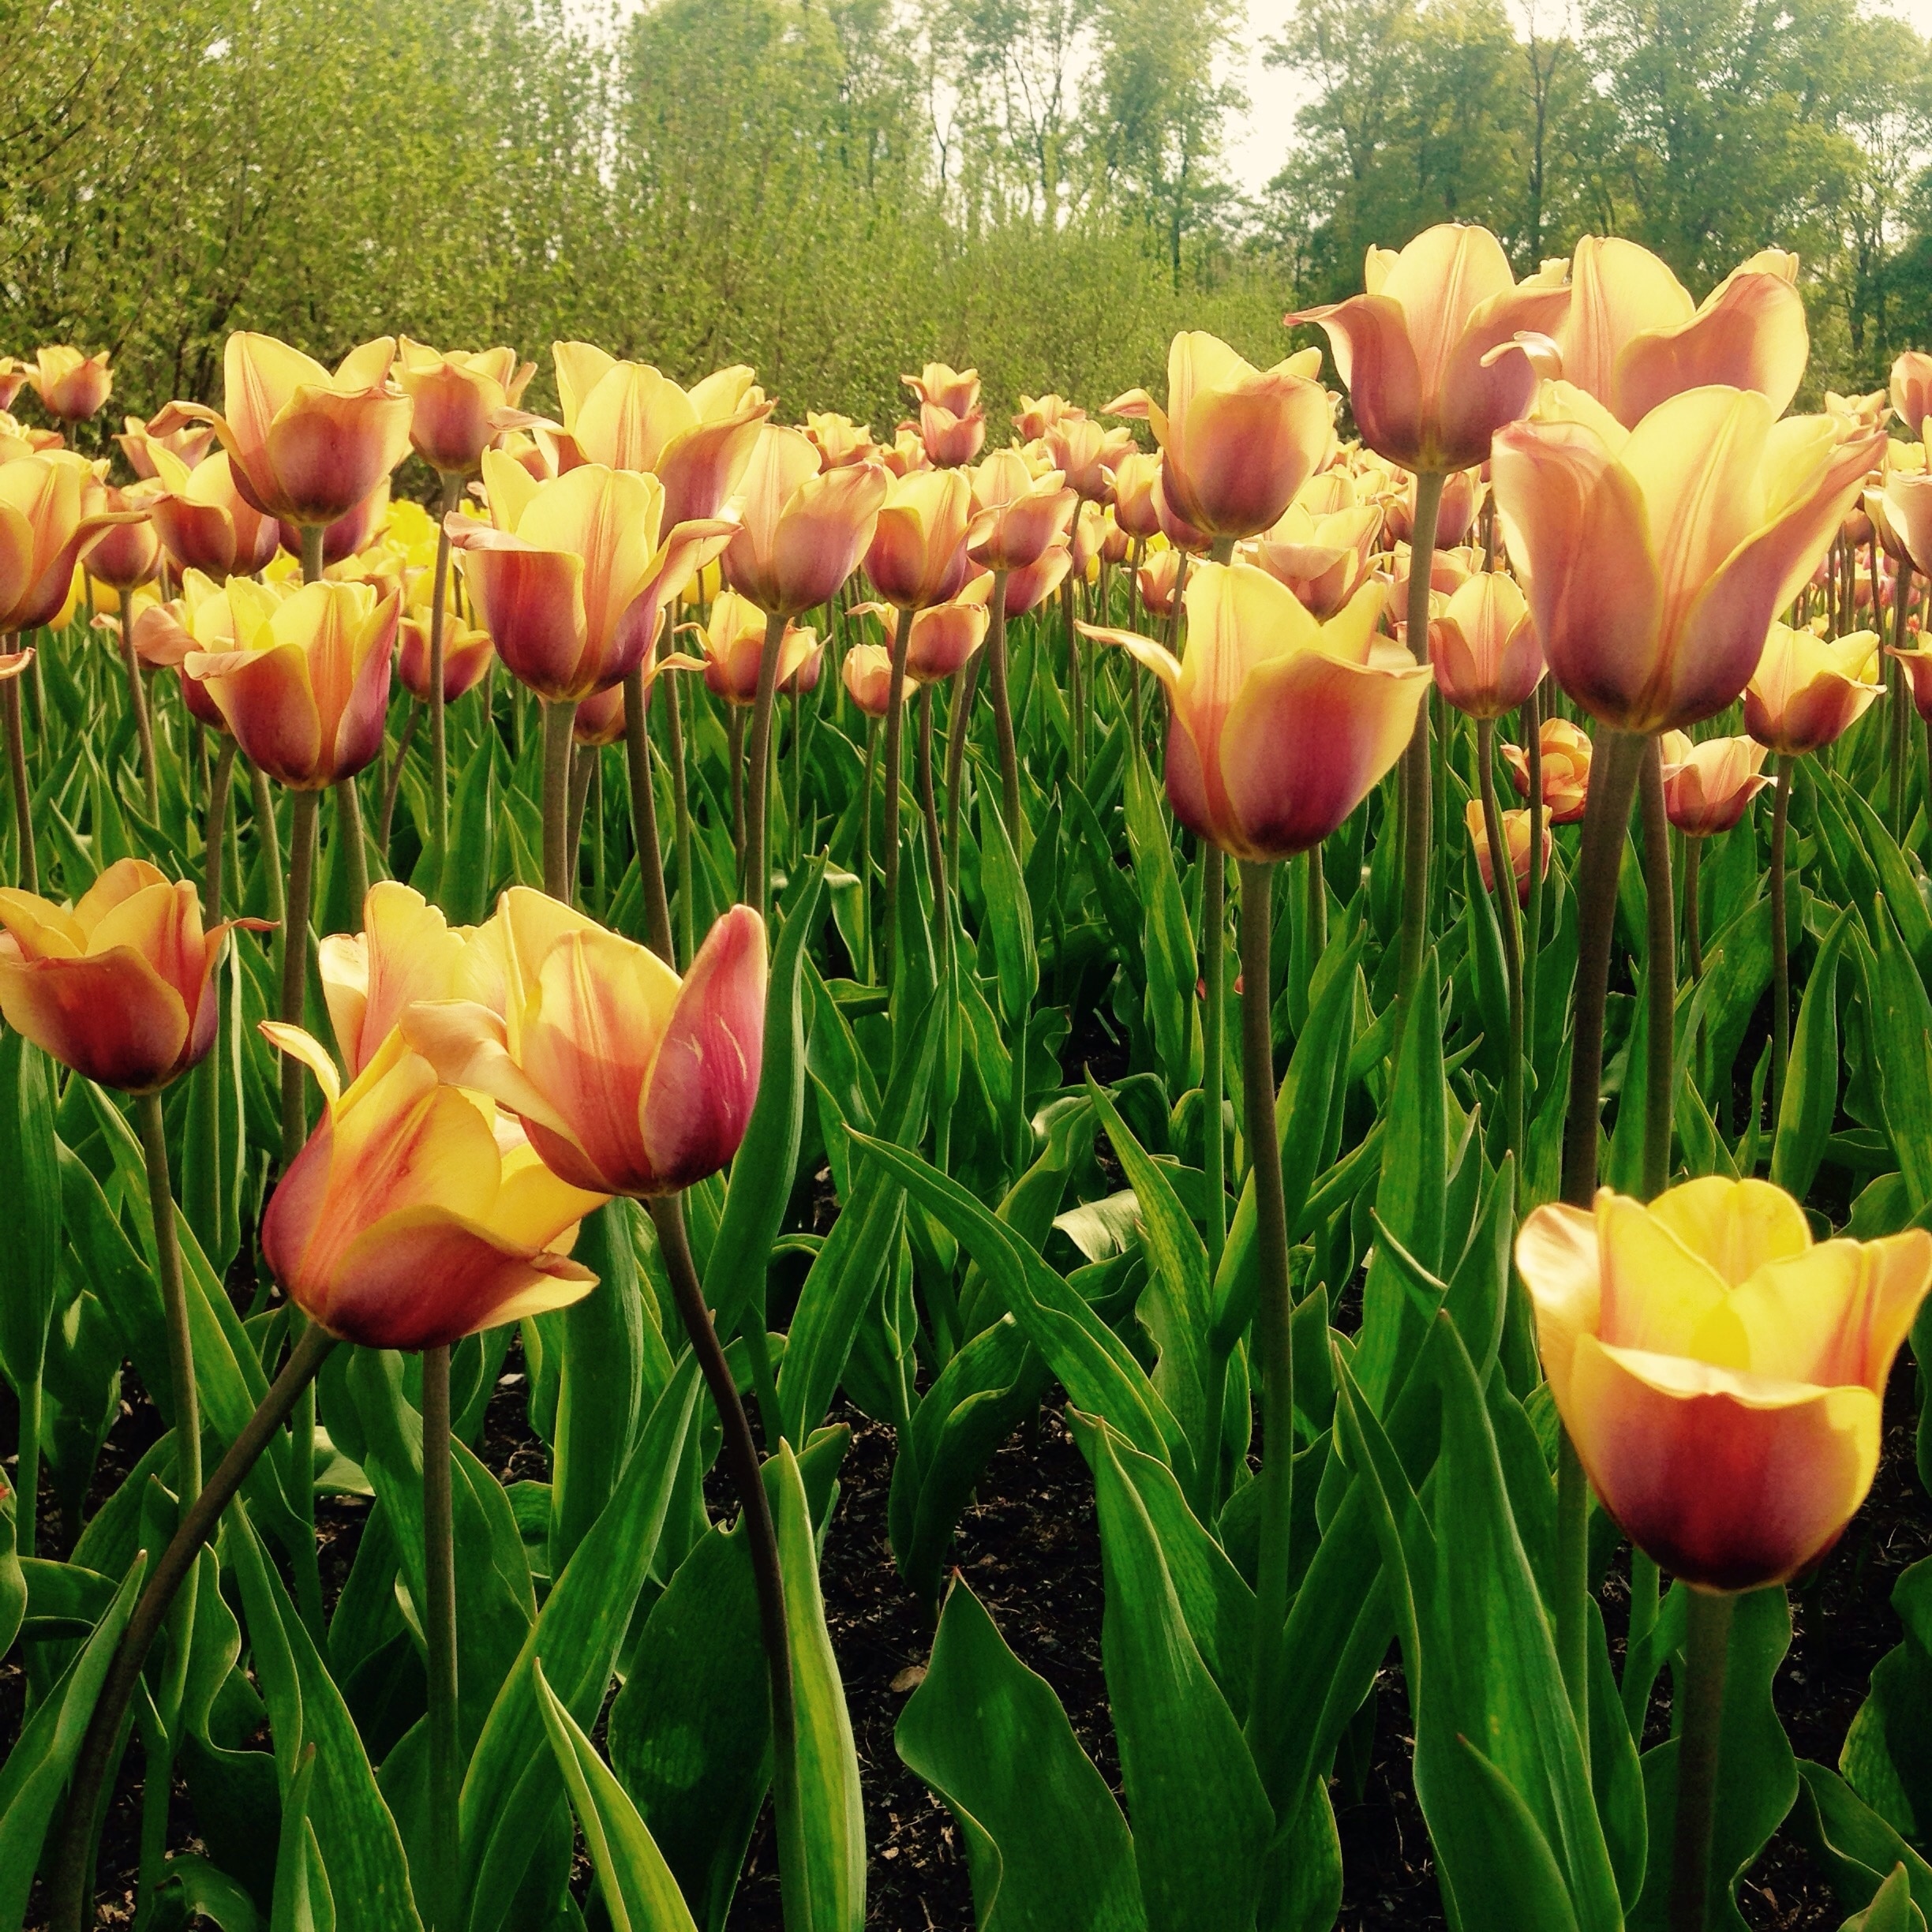 The arboretum at Penn State has a variety of fountains and gardens, including this field of tulips 🌷
#weekendgetaway
#colorful